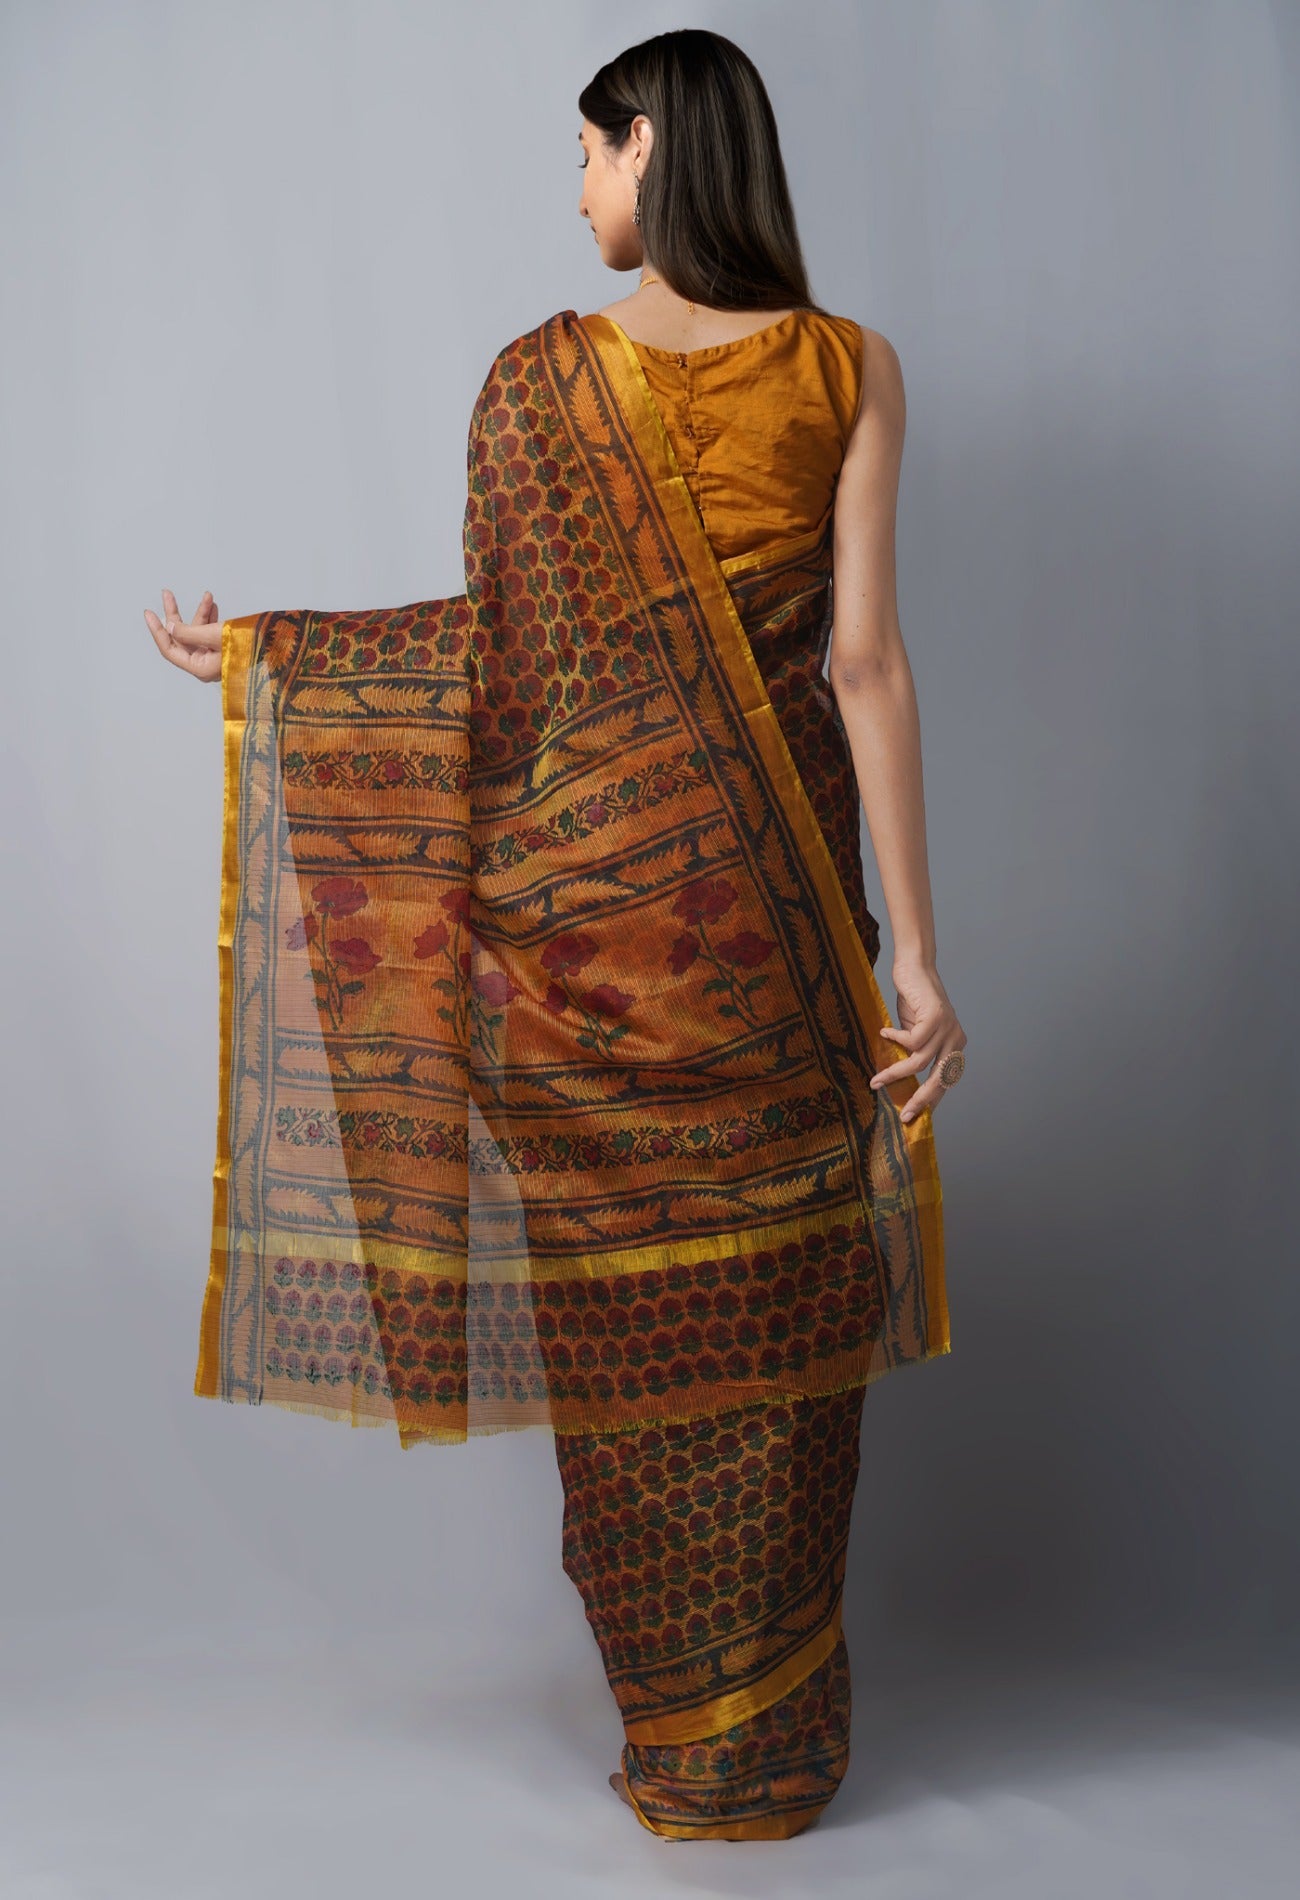 Online Shopping for Yellow Pure Kota Hand Block Print Silk Saree with Hand Block Prints from Rajasthan at Unnatisilks.com India
